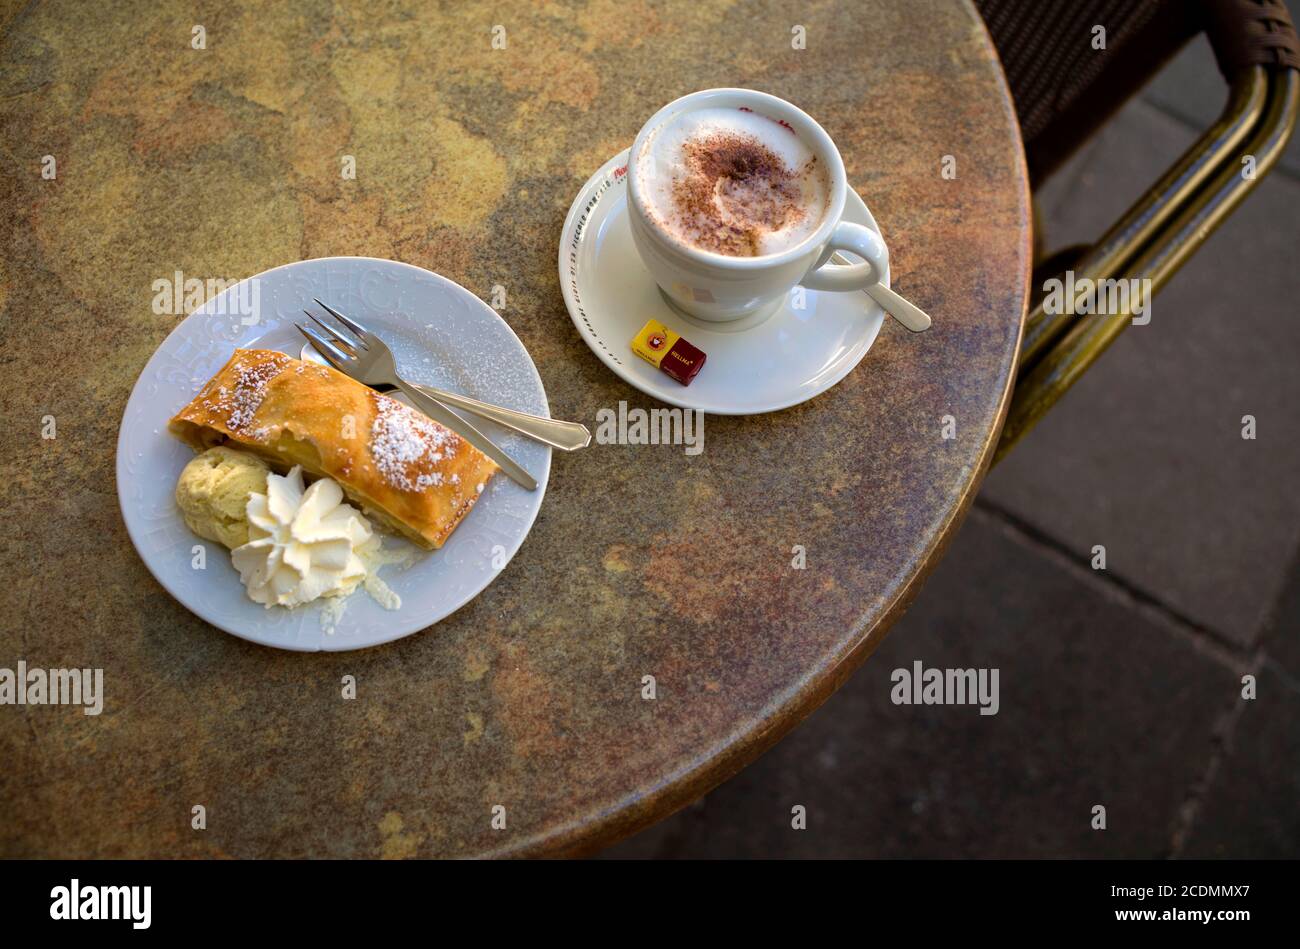 Cappuccino and apple strudel with vanilla ice cream and cream, Cafe, Rothenburg ob der Tauber, Franconia, Bavaria, Germany Stock Photo